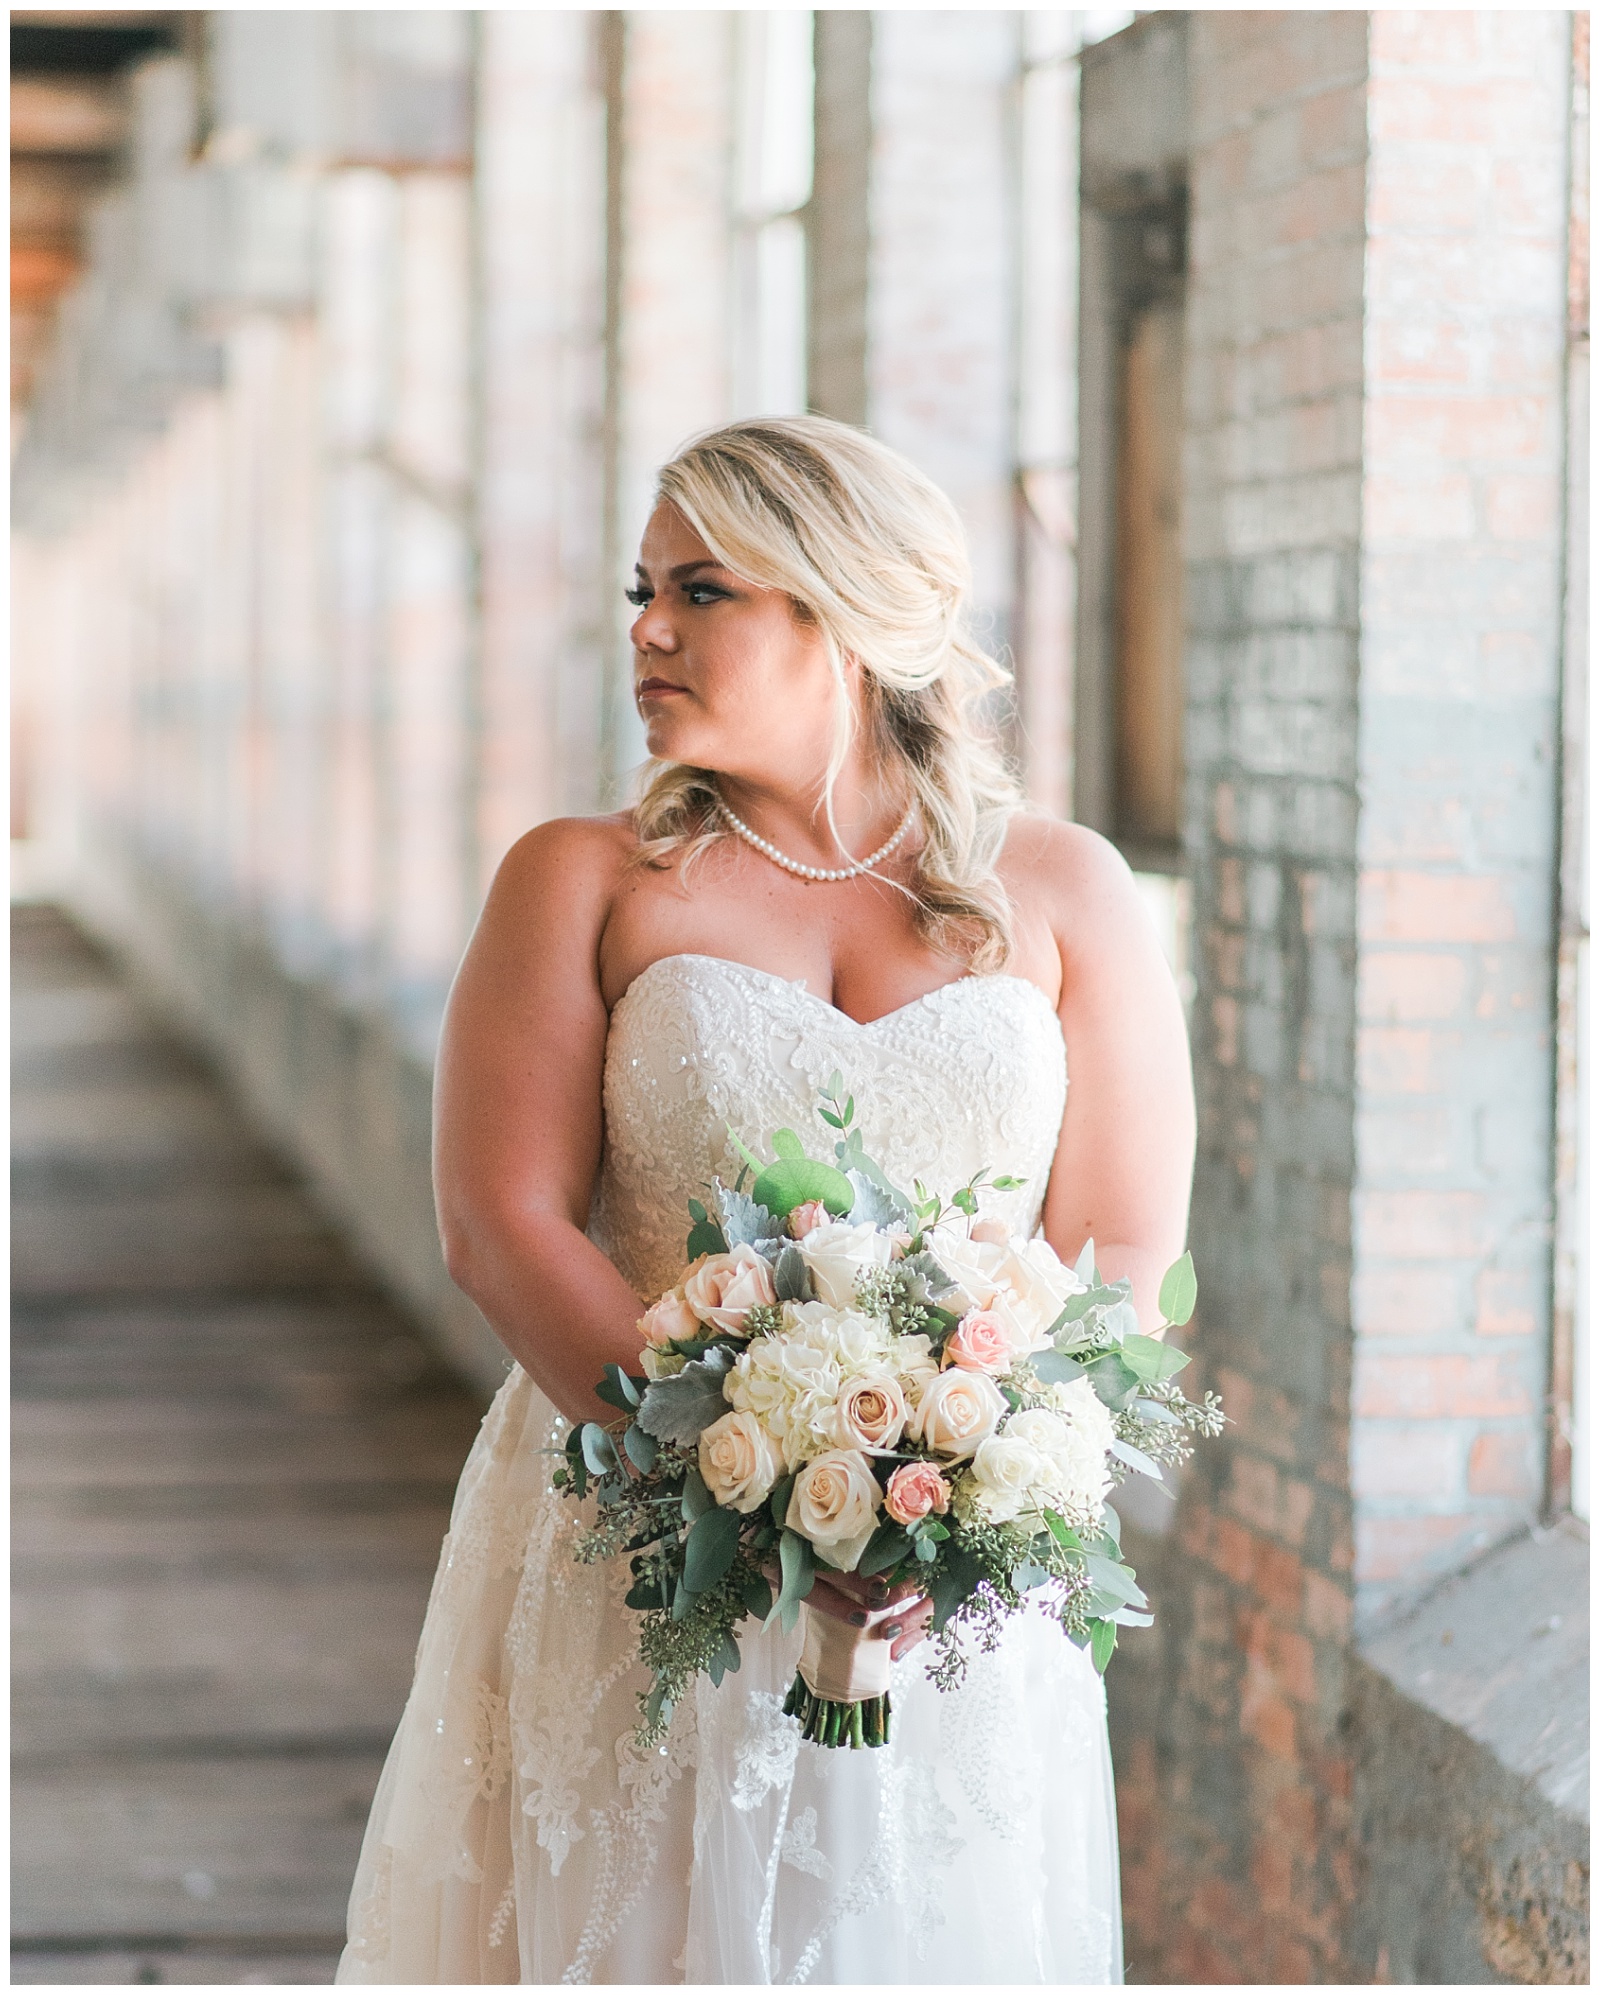 Kendall's Bridal Session | McKinney Cotton Mill - Catie Ann Photography